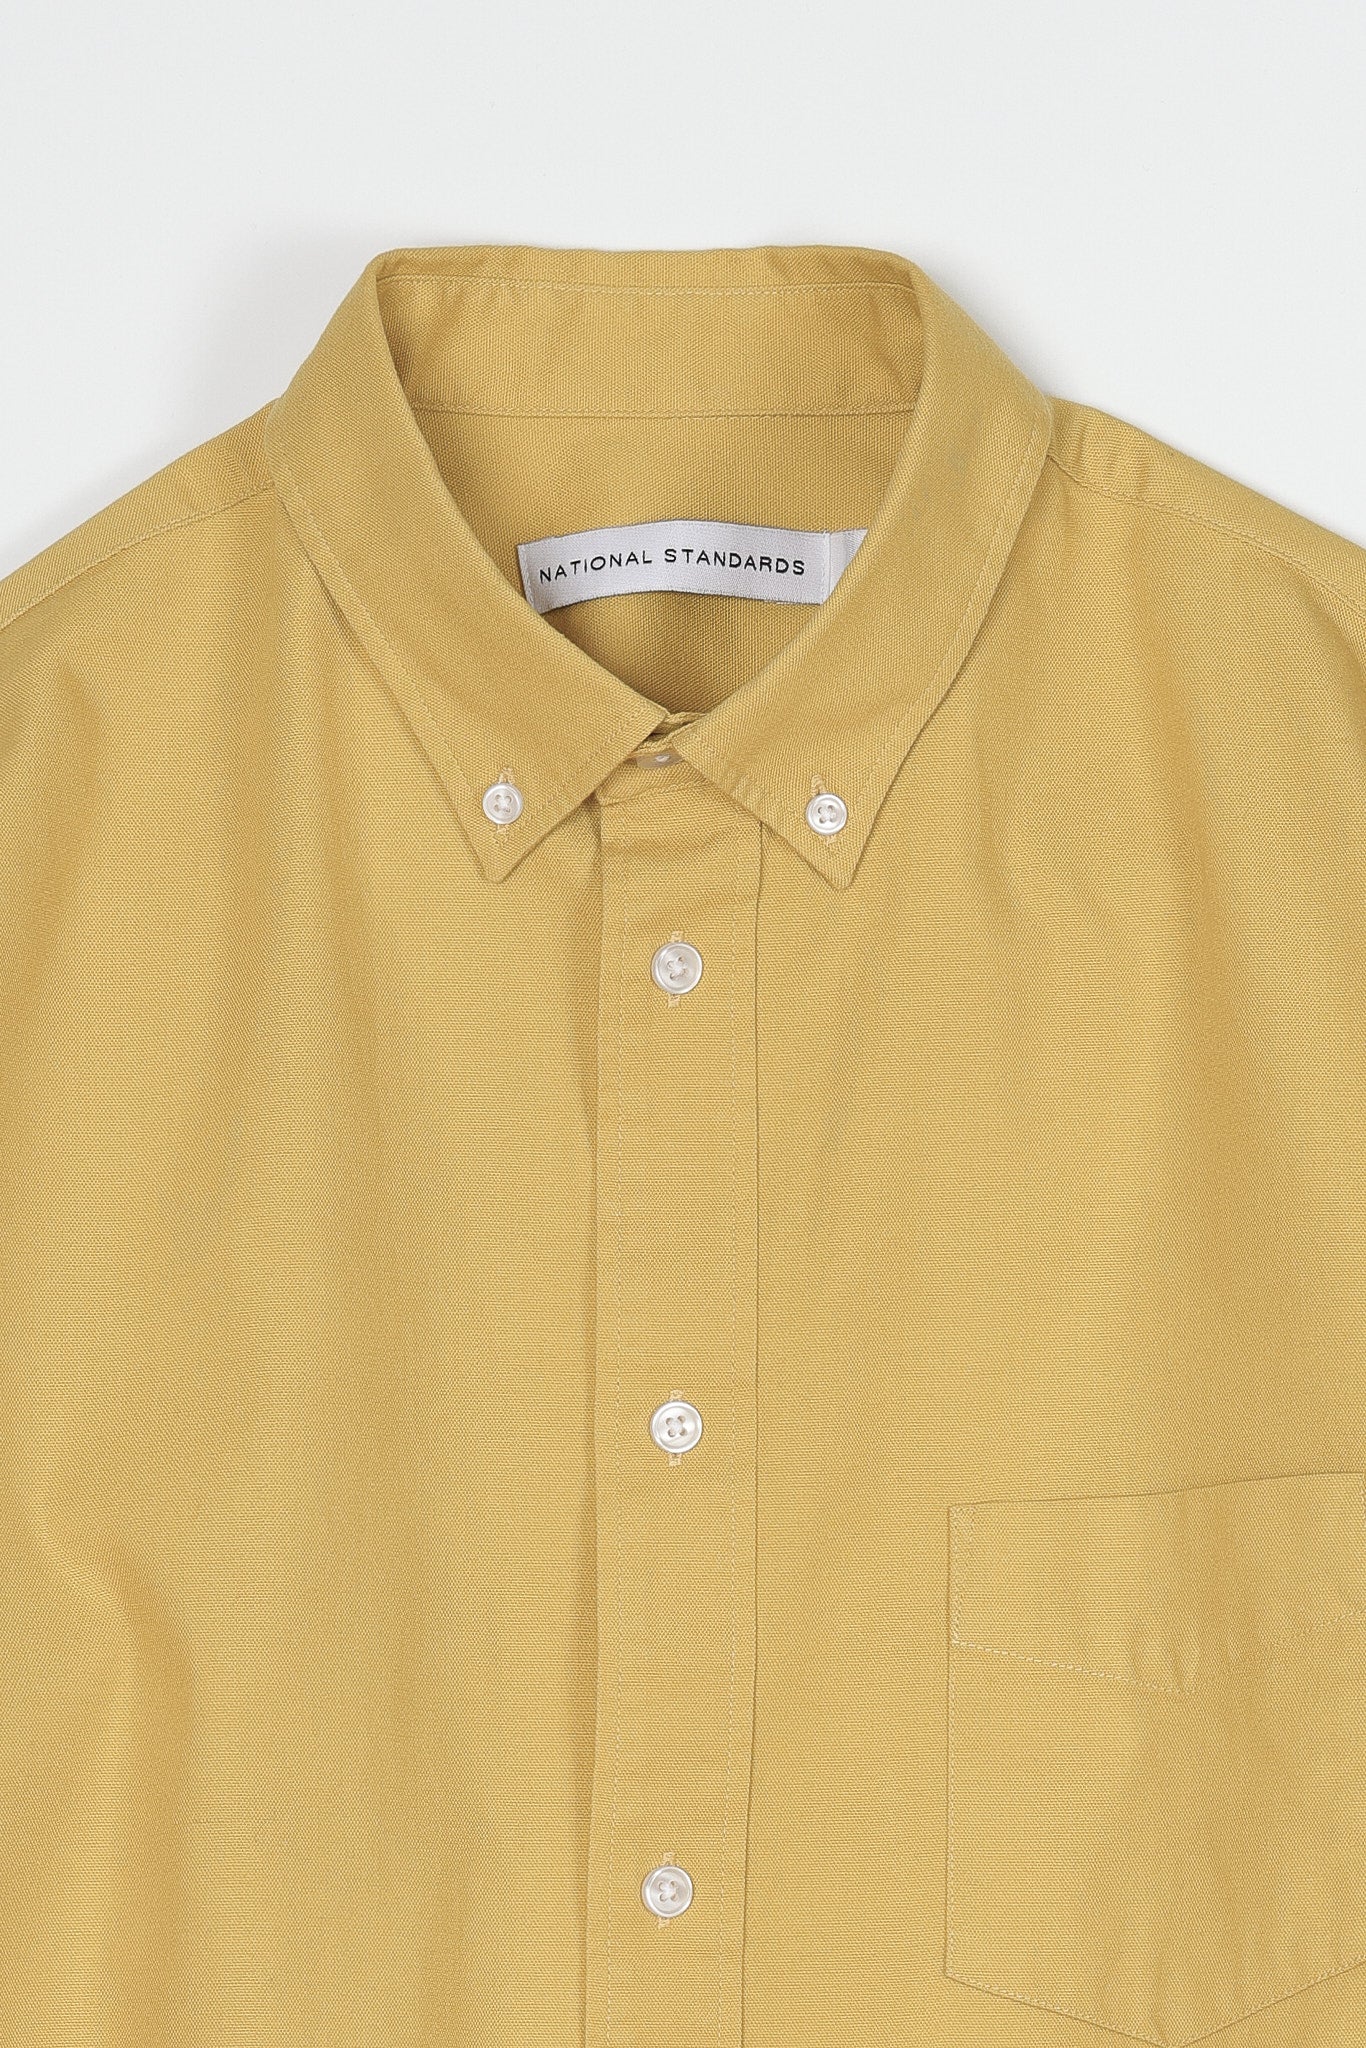 Japanese Washed Oxford in Sunflower 06